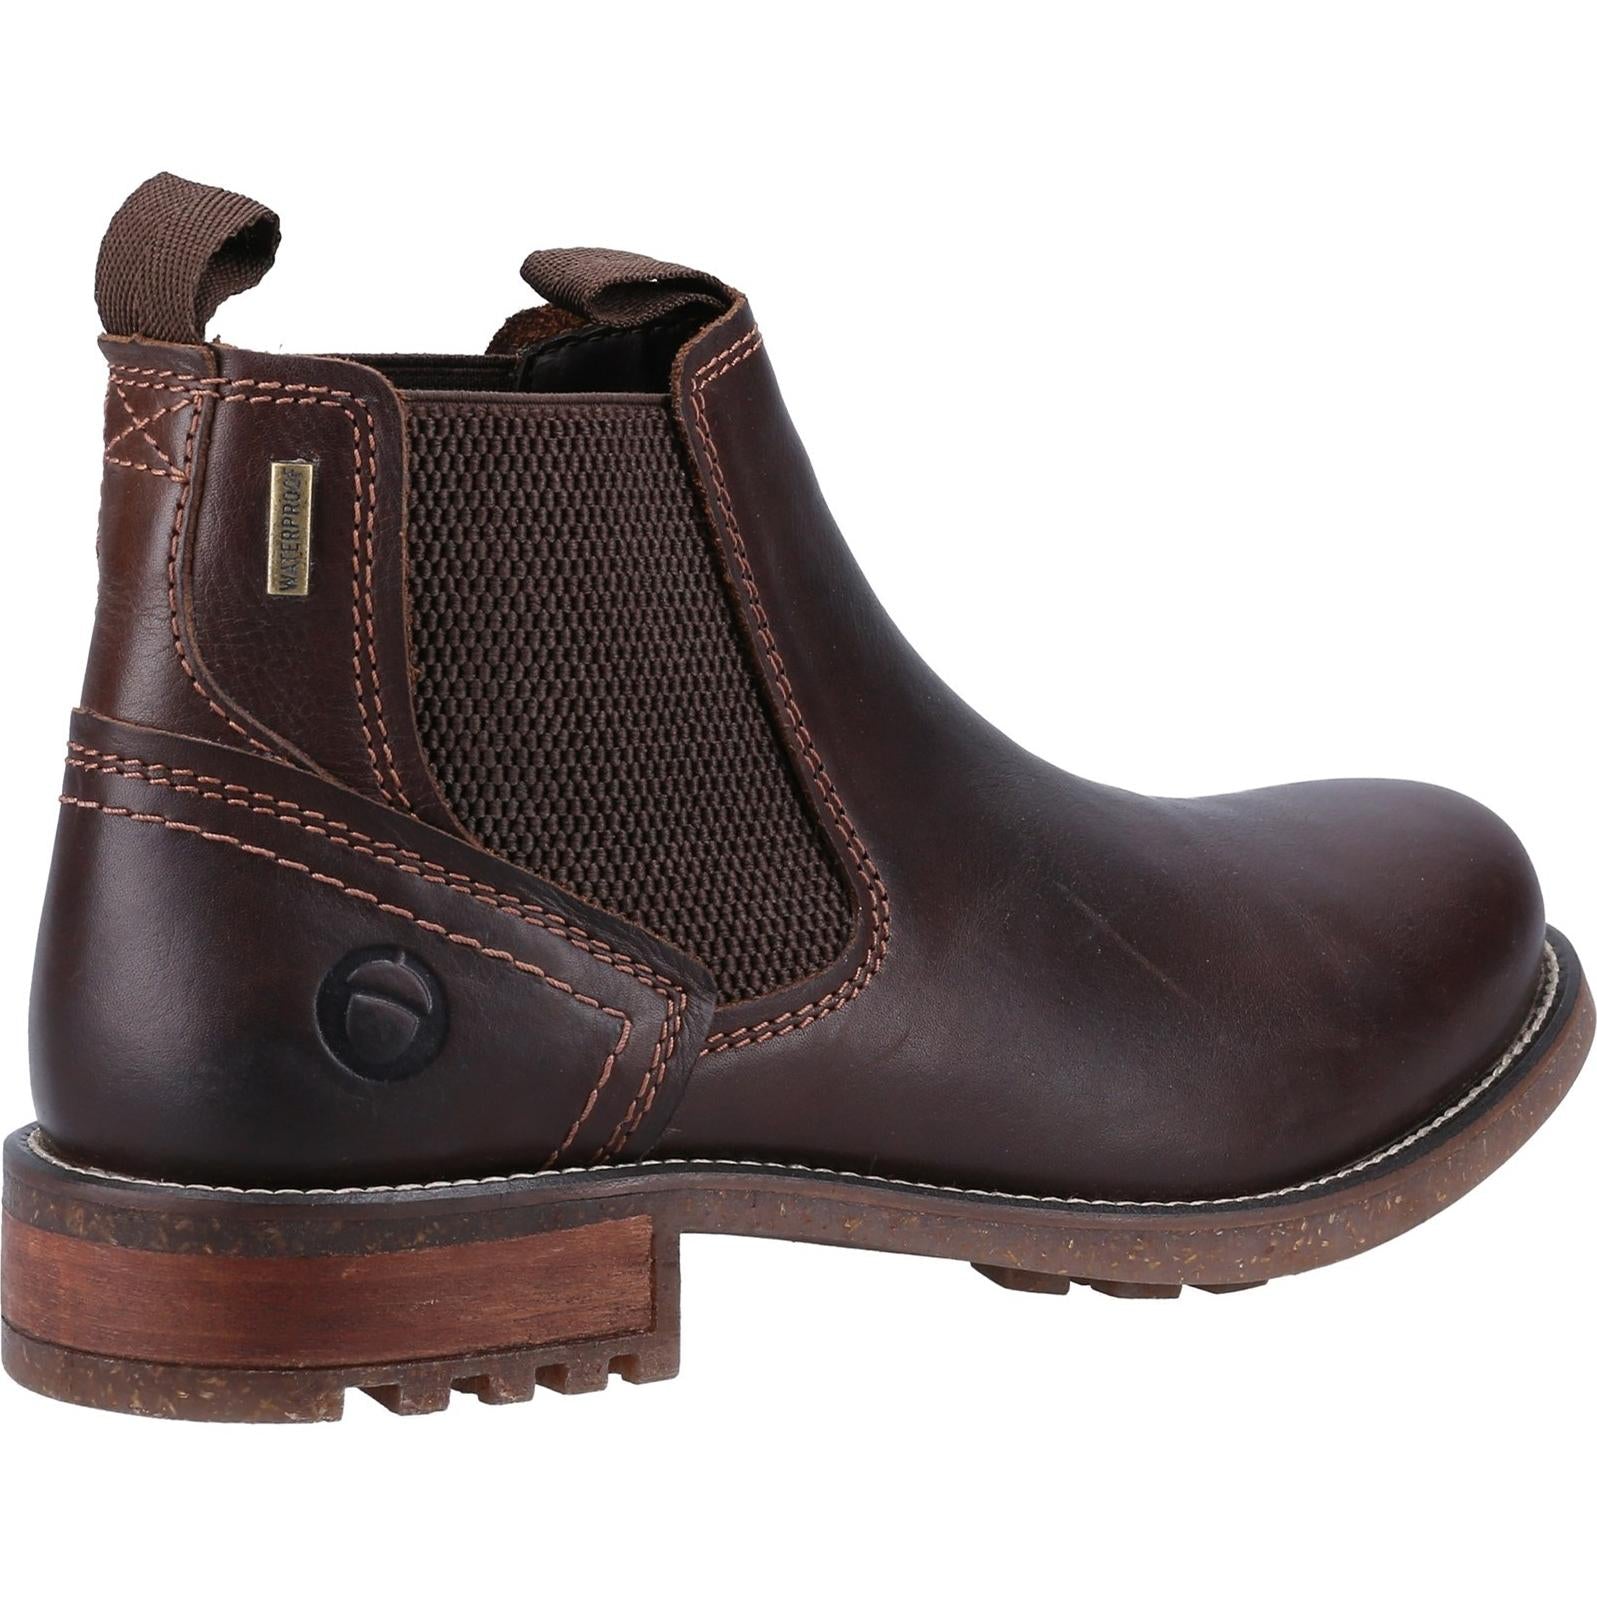 Cotswold Hartpury Chelsea Boot